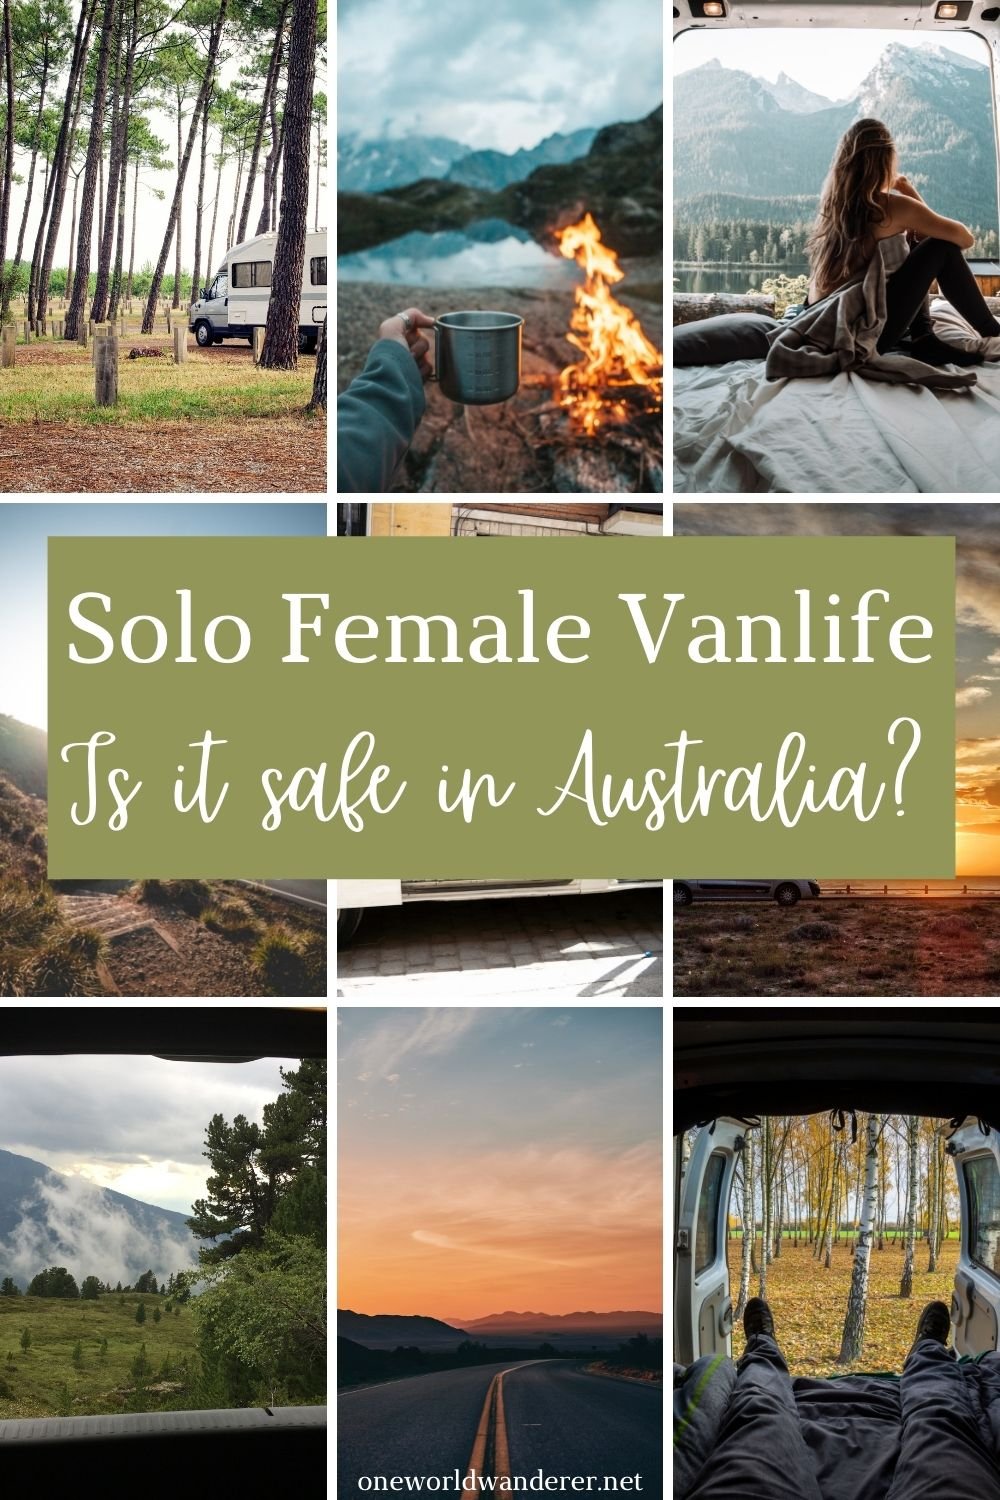 Is it safe to do Van life as a Solo Female Traveller? How to do vanlife in Australia as a solo woman. Travelling solo as a woman in Australia and all the tips and tricks you need to know to do it too + how to stay safe. #solofemaletravel #vanlife #solofemalevanlife #vanlifeaustralia